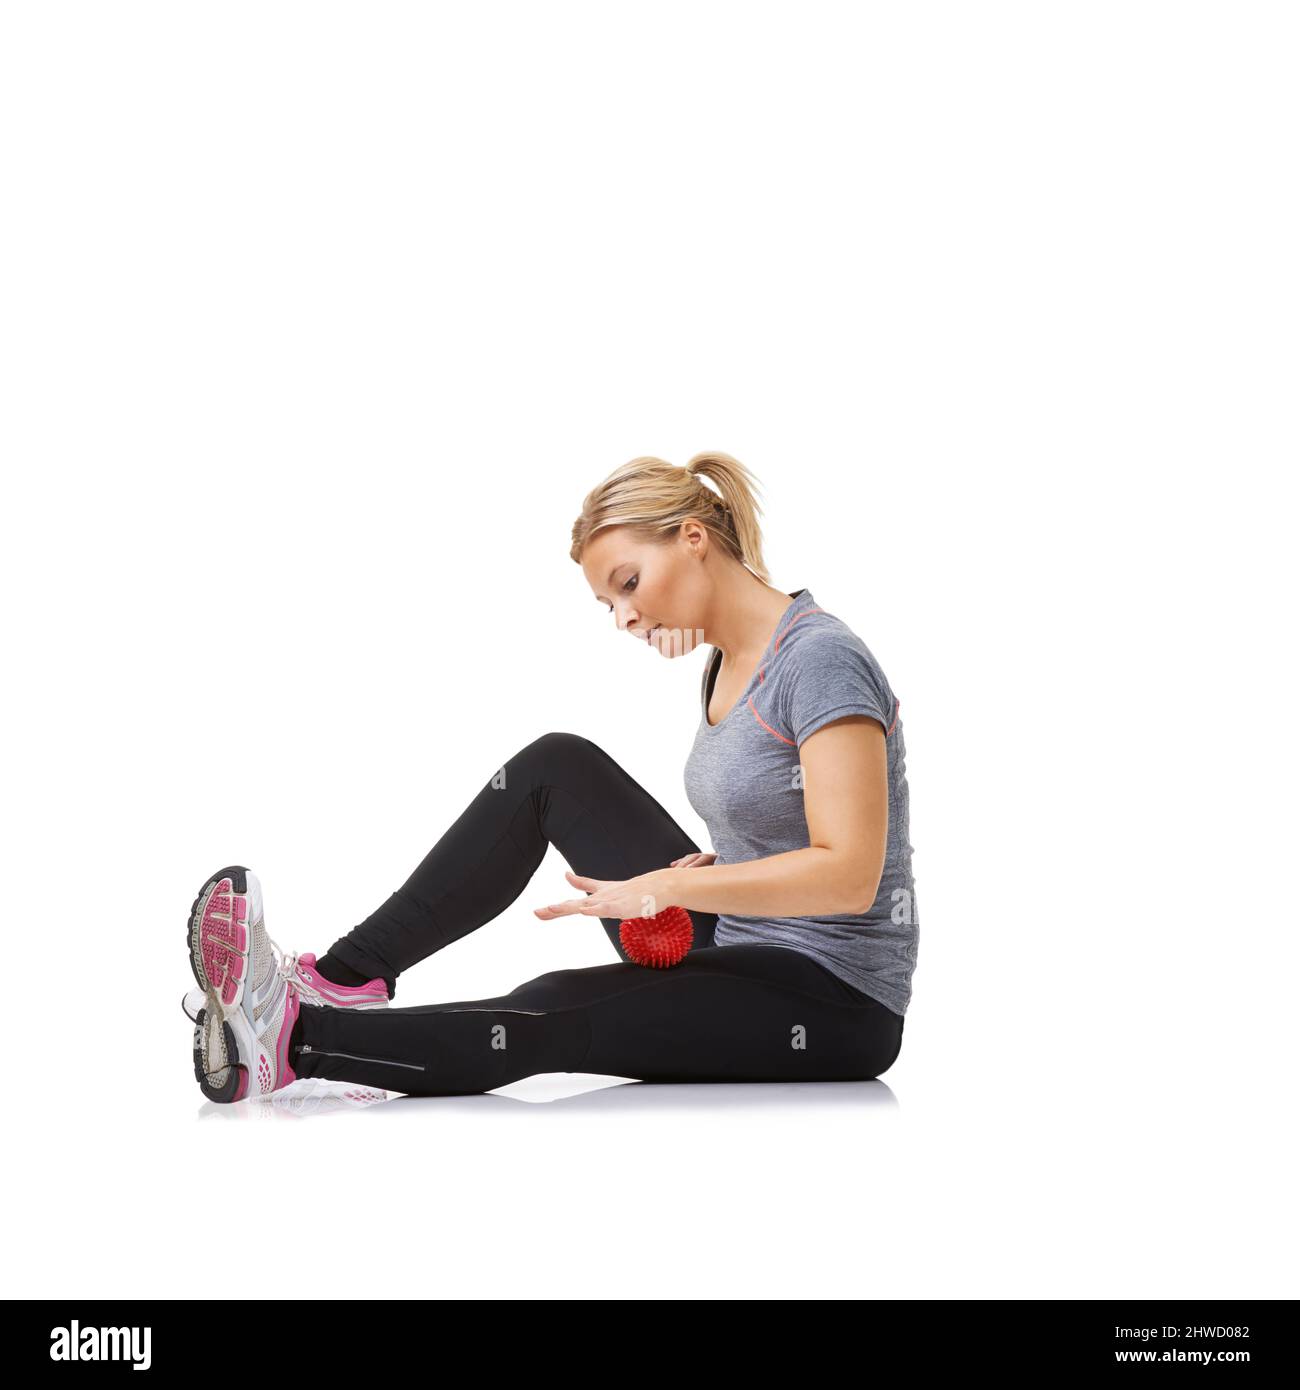 Toning her legs. A young woman getting in shape using an exercise ball. Stock Photo